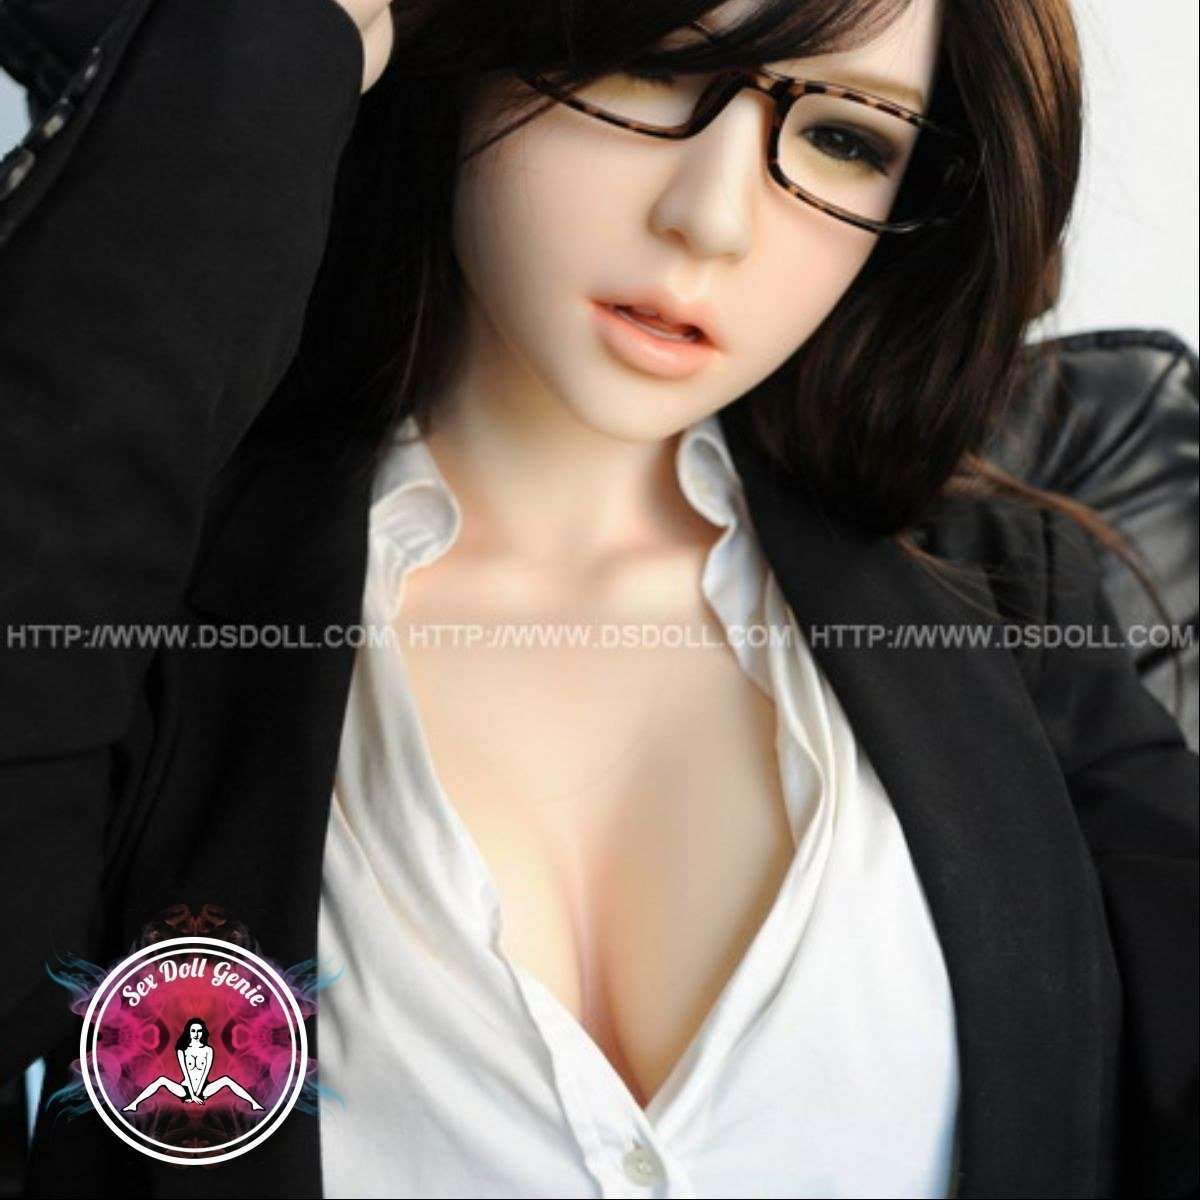 DS Doll - 158cm - Kathy Head - Type 3 D Cup Silicone Doll-14